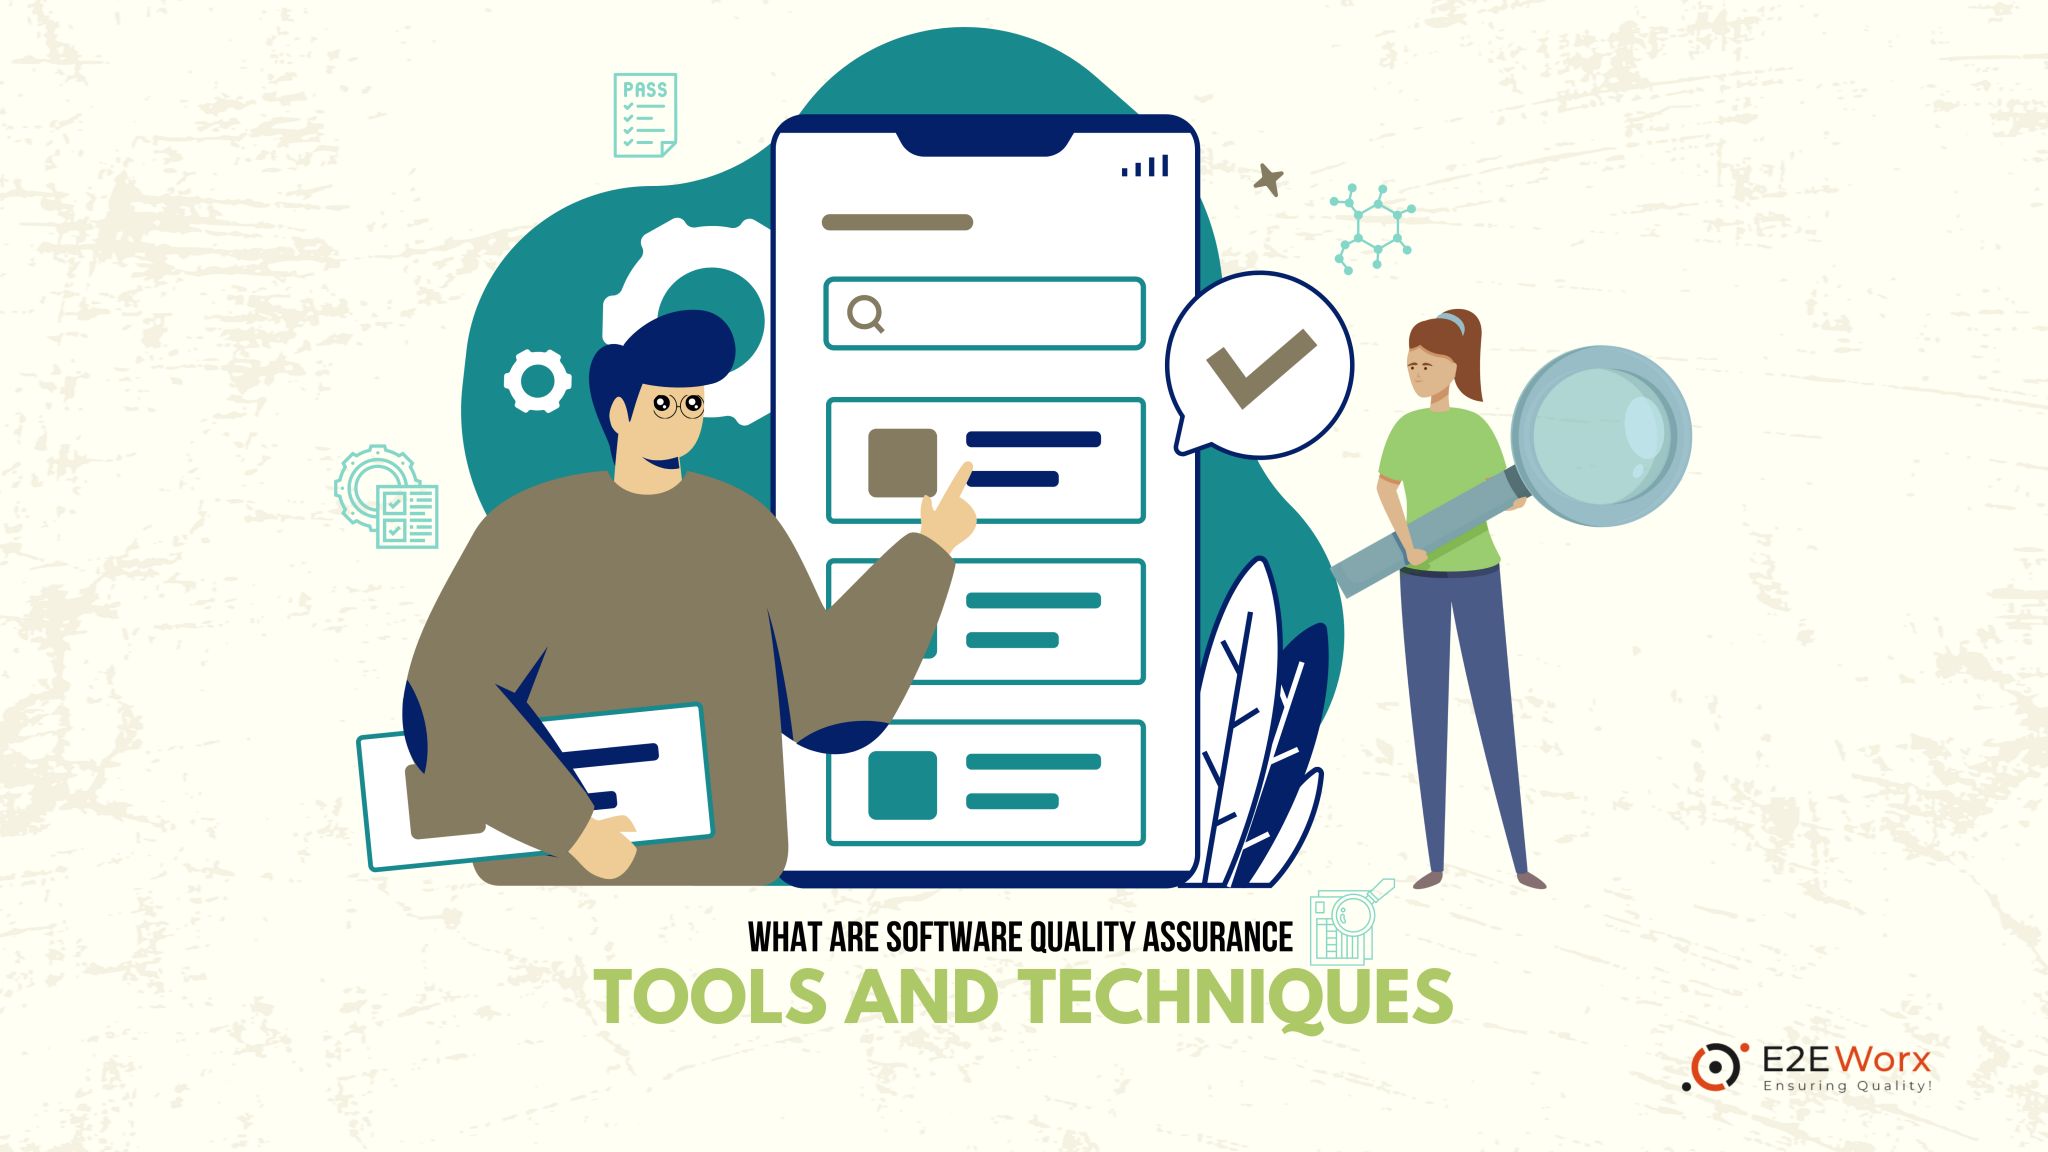 What are Software Quality Assurance Tools and Techniques